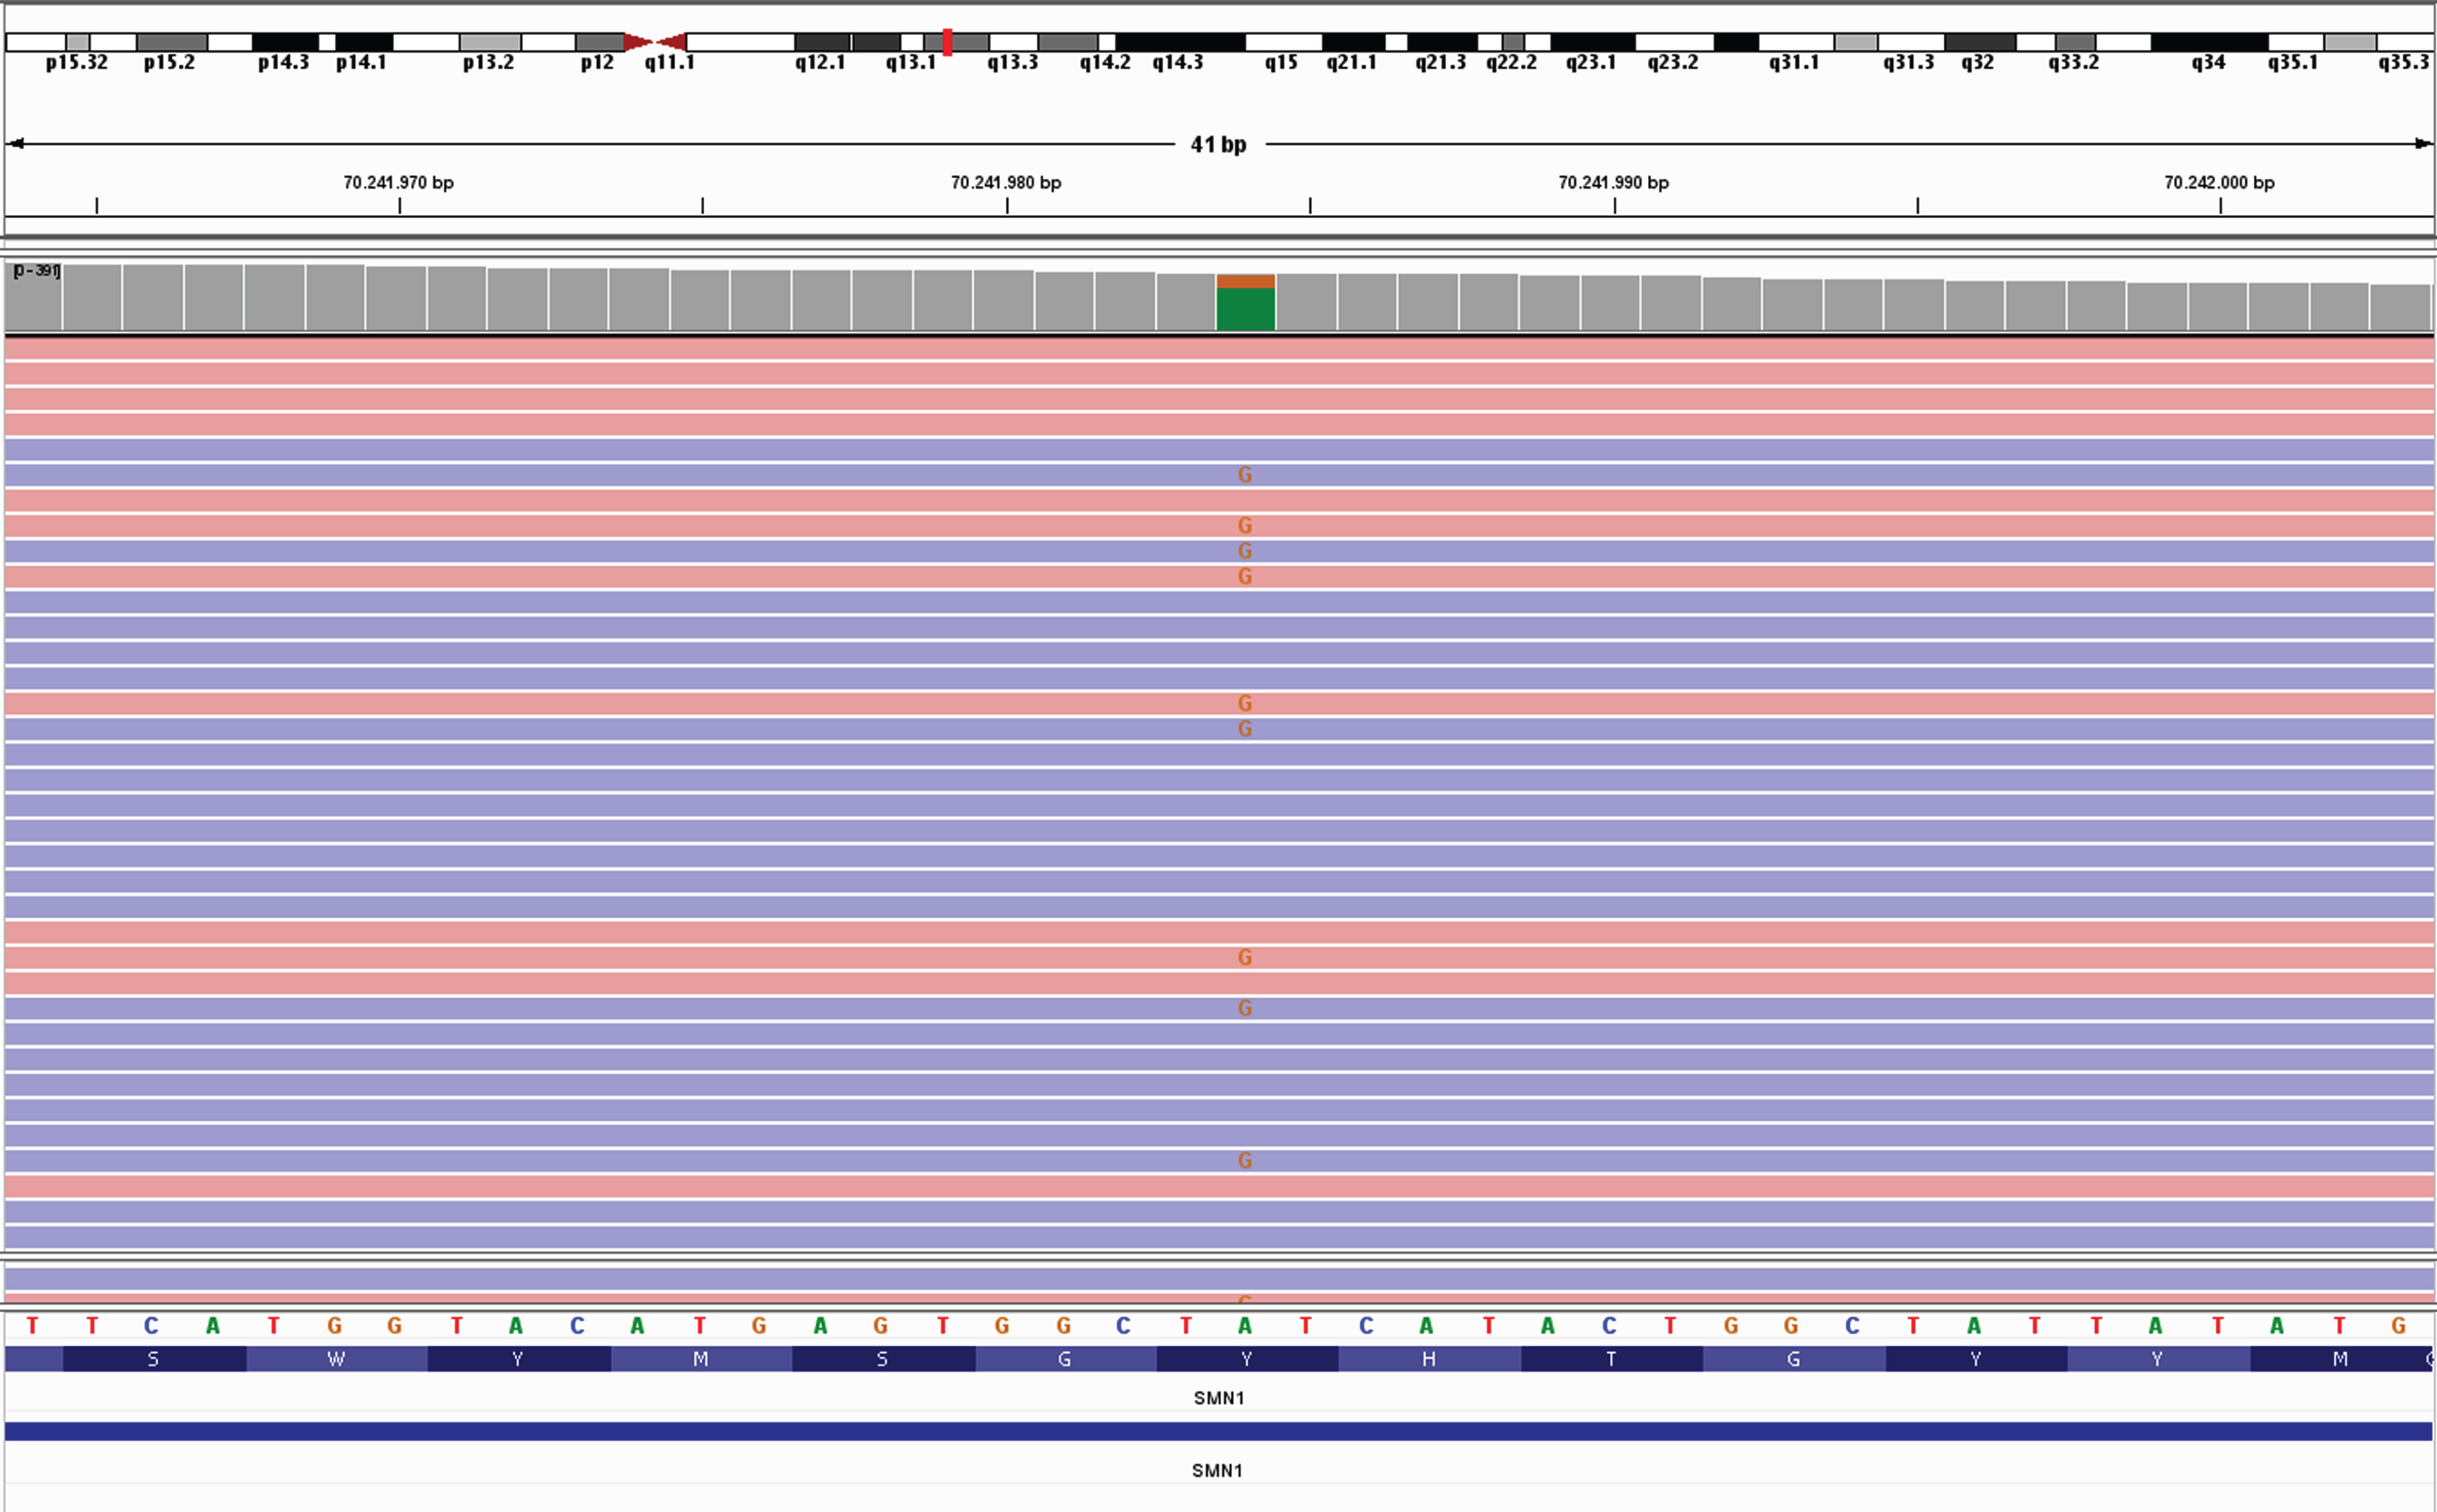 Example of a heterozygous pathogenic variant in SMN1, NM_000344.4:c.815A>G p.(Tyr272Cys) in the IGV (Integrative Genomics Viewer (27)).